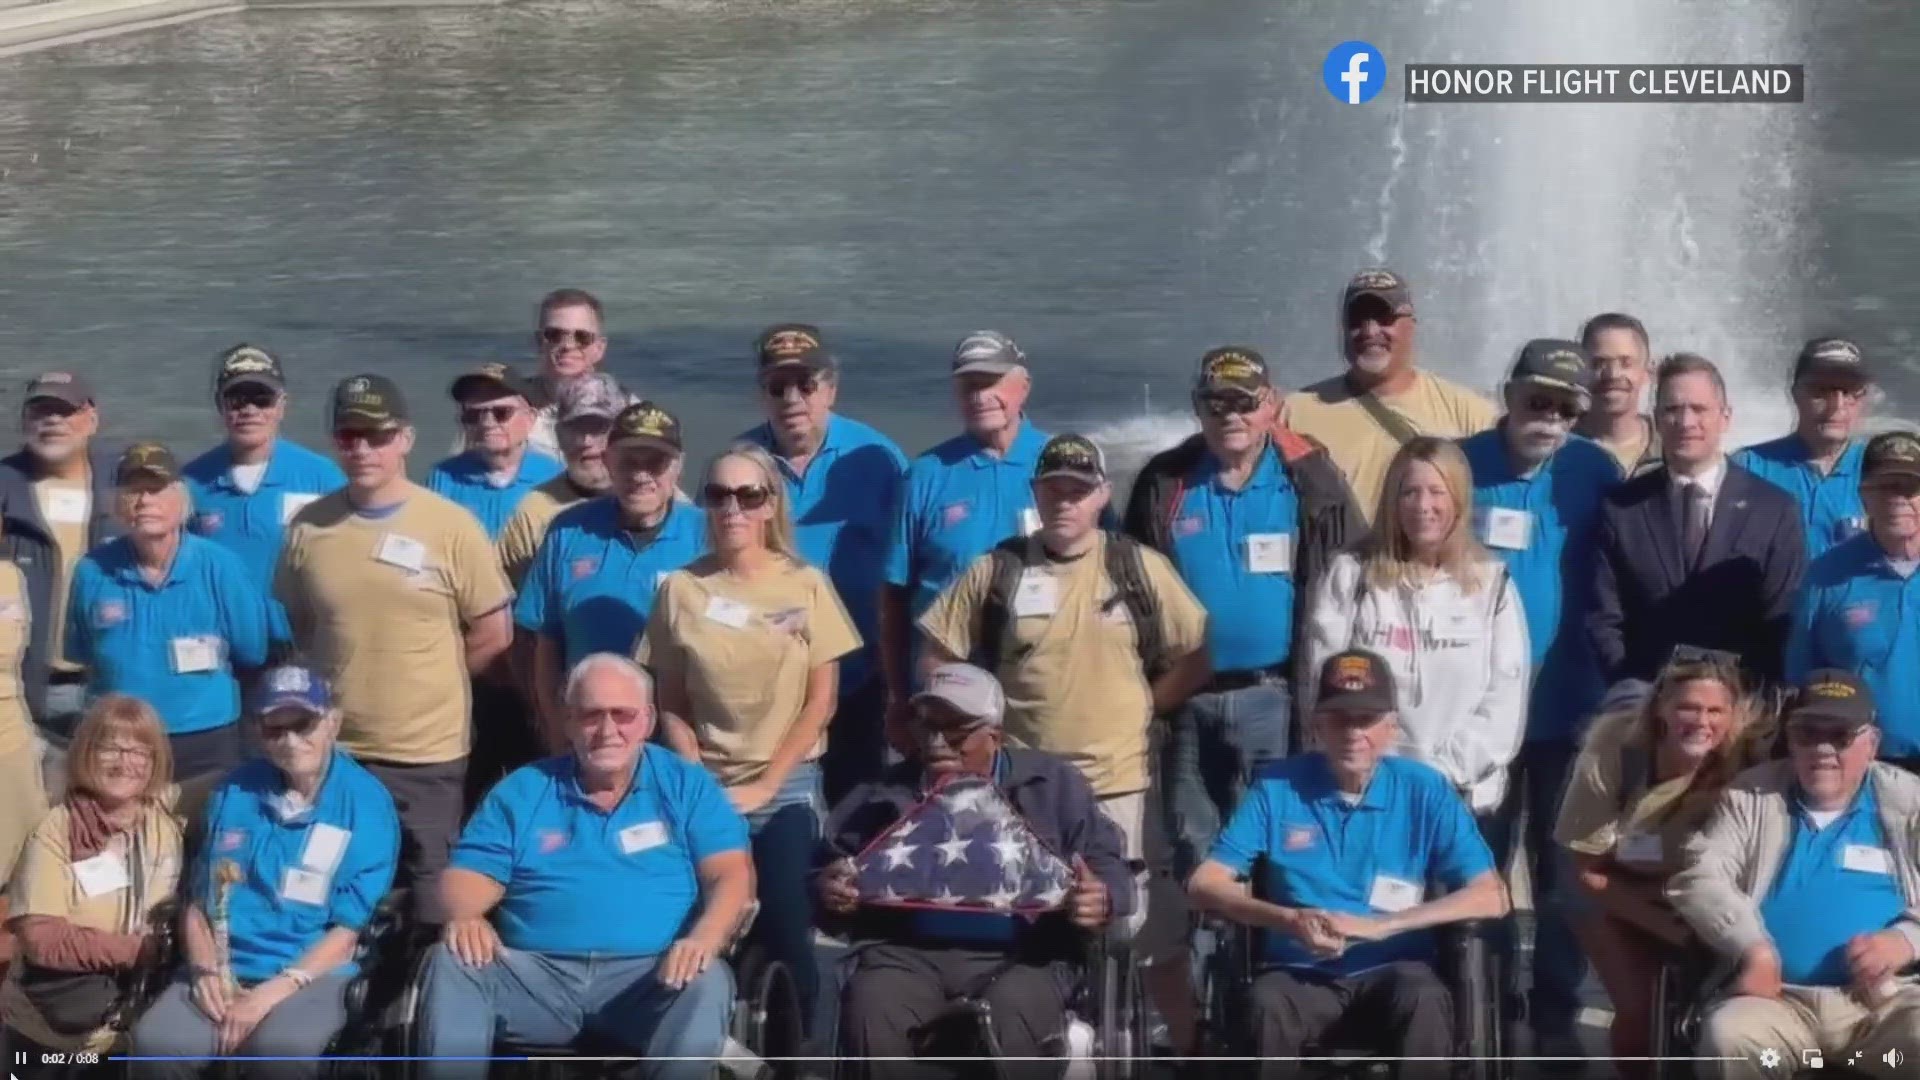 To date, nearly 4,000 veterans from Northeast Ohio have taken the free trip from Cleveland to Washington, DC to visit memorials dedicated to their service.